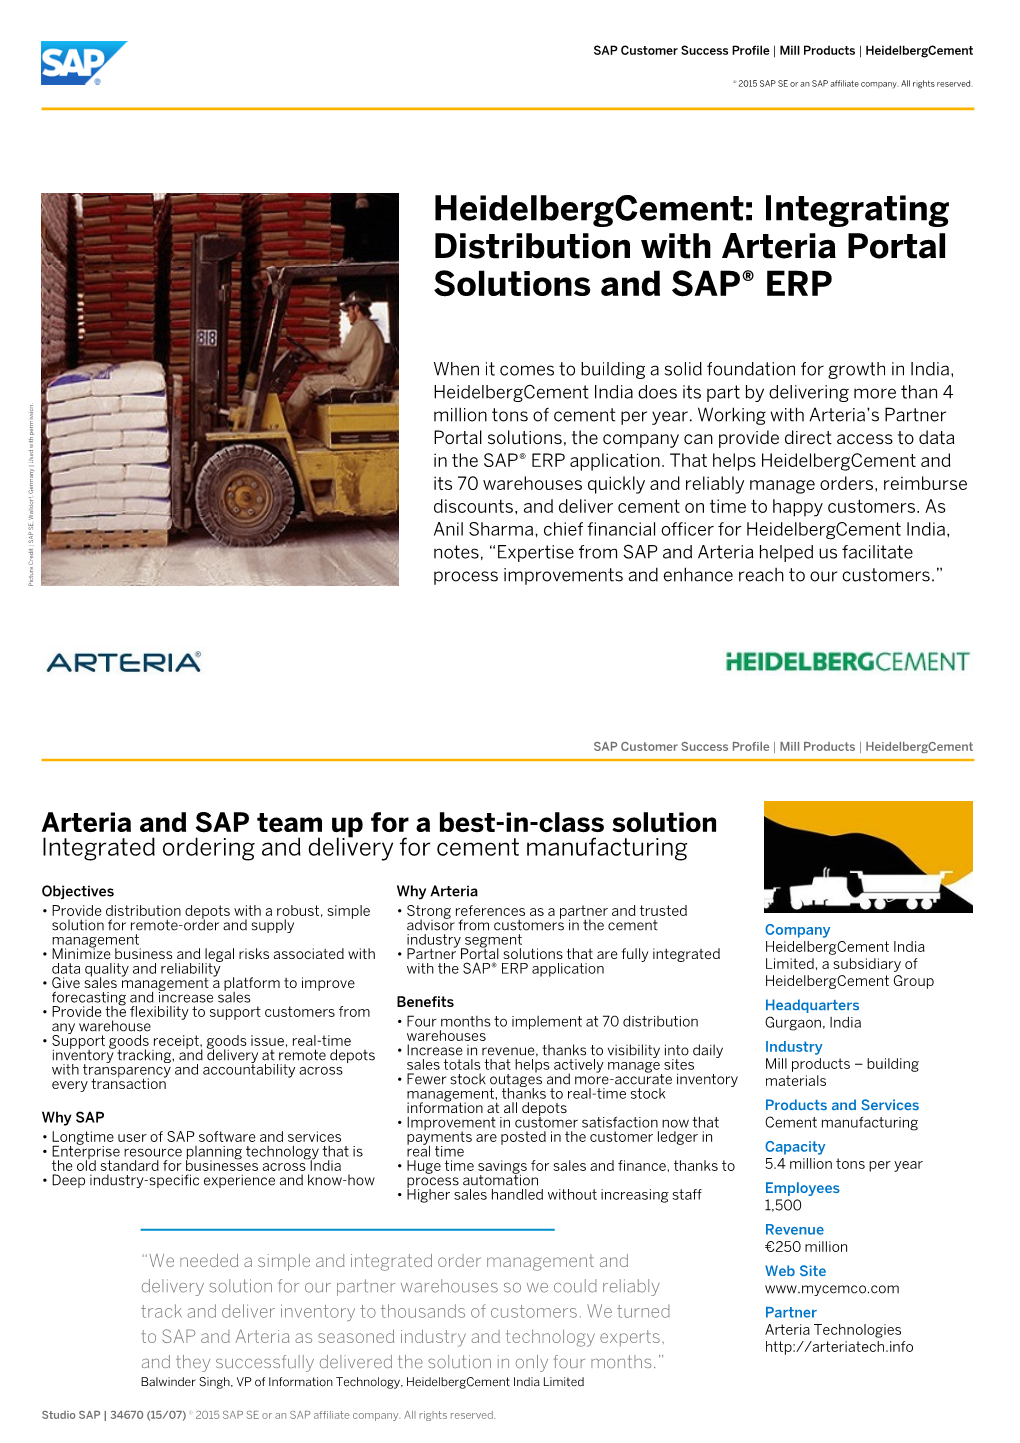 Integrating Distribution with Arteria Portal Solutions and SAP® ERP